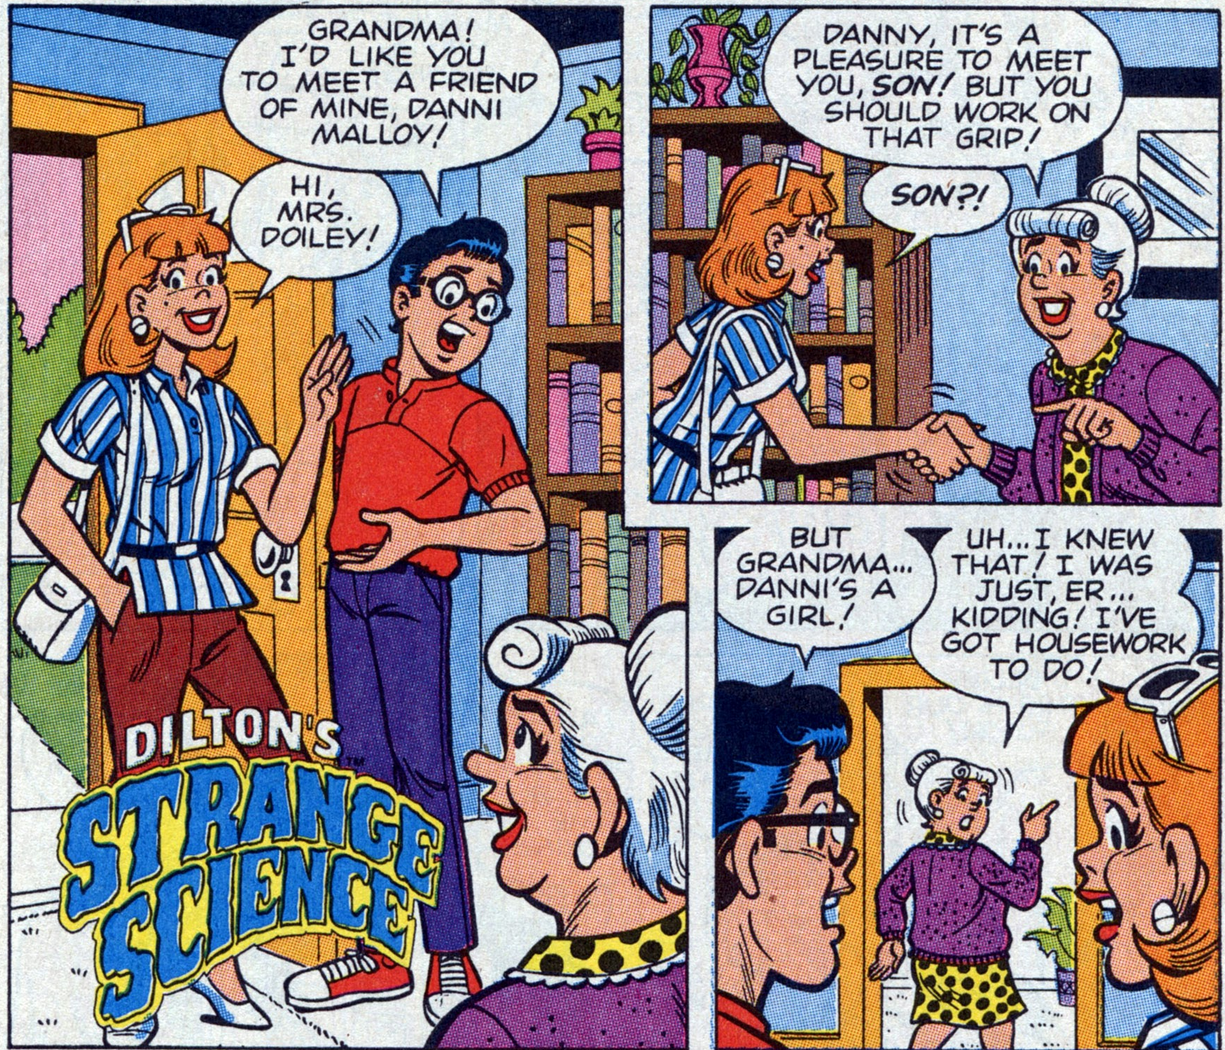 Dilton Doiley introduces Danni Malloy to his grandmother in Dilton's Weird Science Vol. 1 #2 "It's About Time" (1989), Archie Comics. Words by Bill Golliher, art by Jon D'Agnosto, Bill Yoshida, and Barry Grossman.